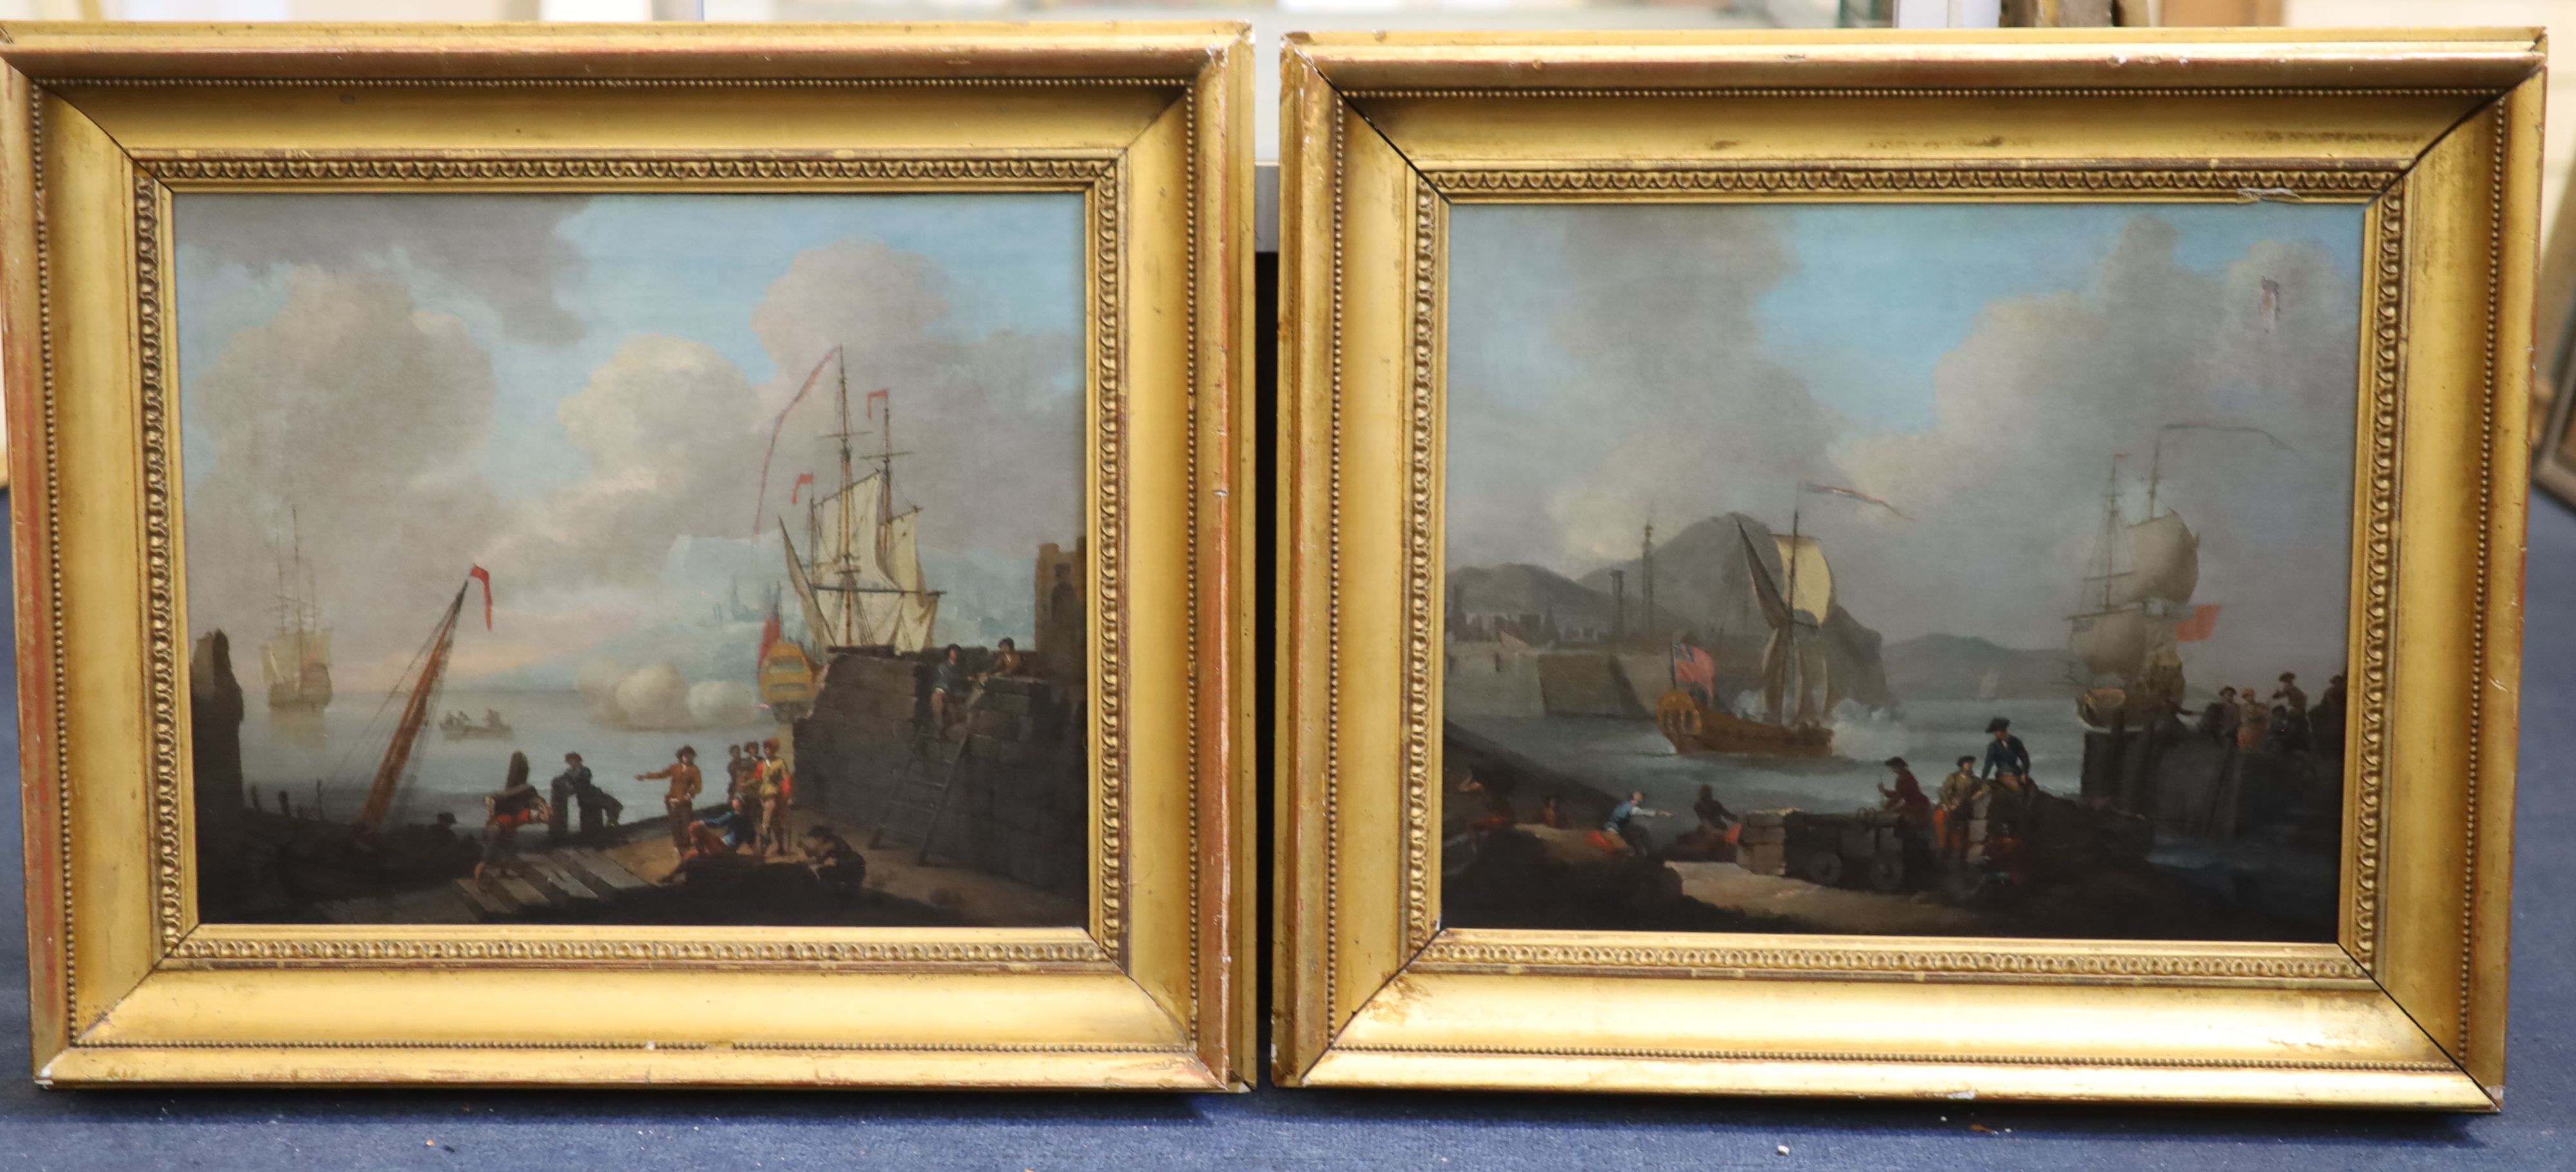 Follower of Joseph Vernet (1714-1789) Harbour scenes with warships firing salutes 13 x 15.75in.